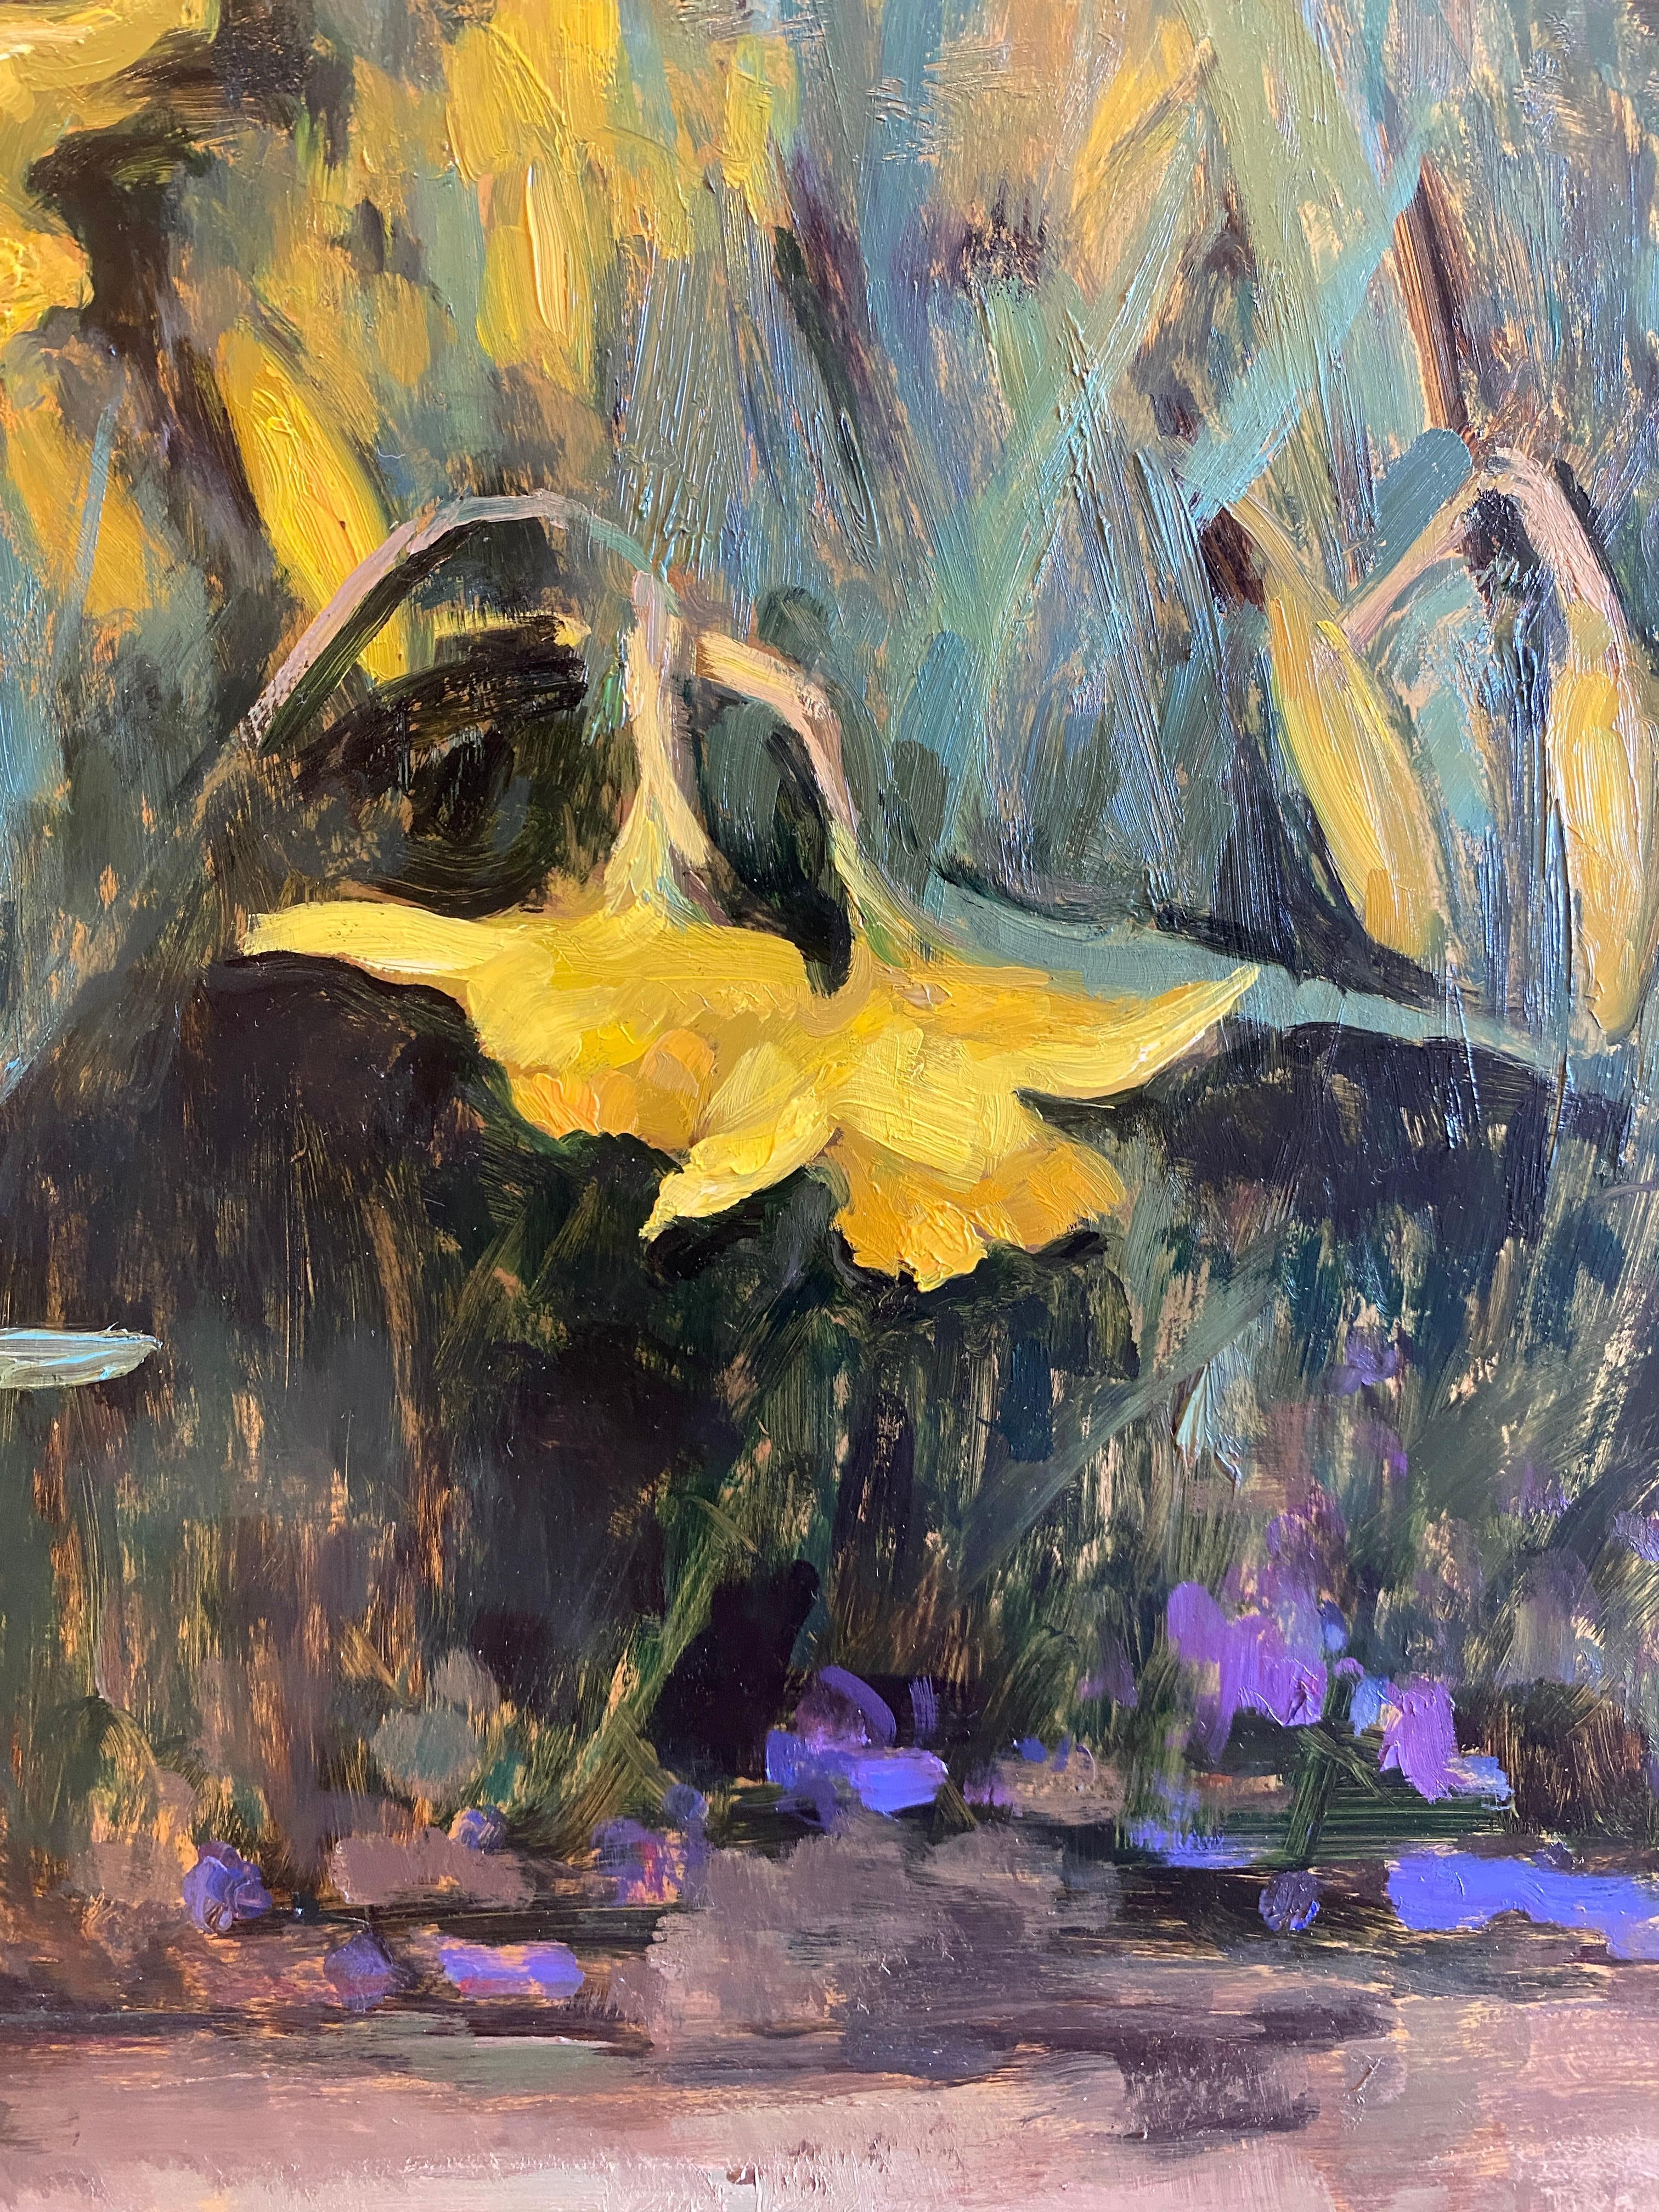 Daffodils in the Sunshine - Impressionist Painting by Melissa Franklin Sanchez